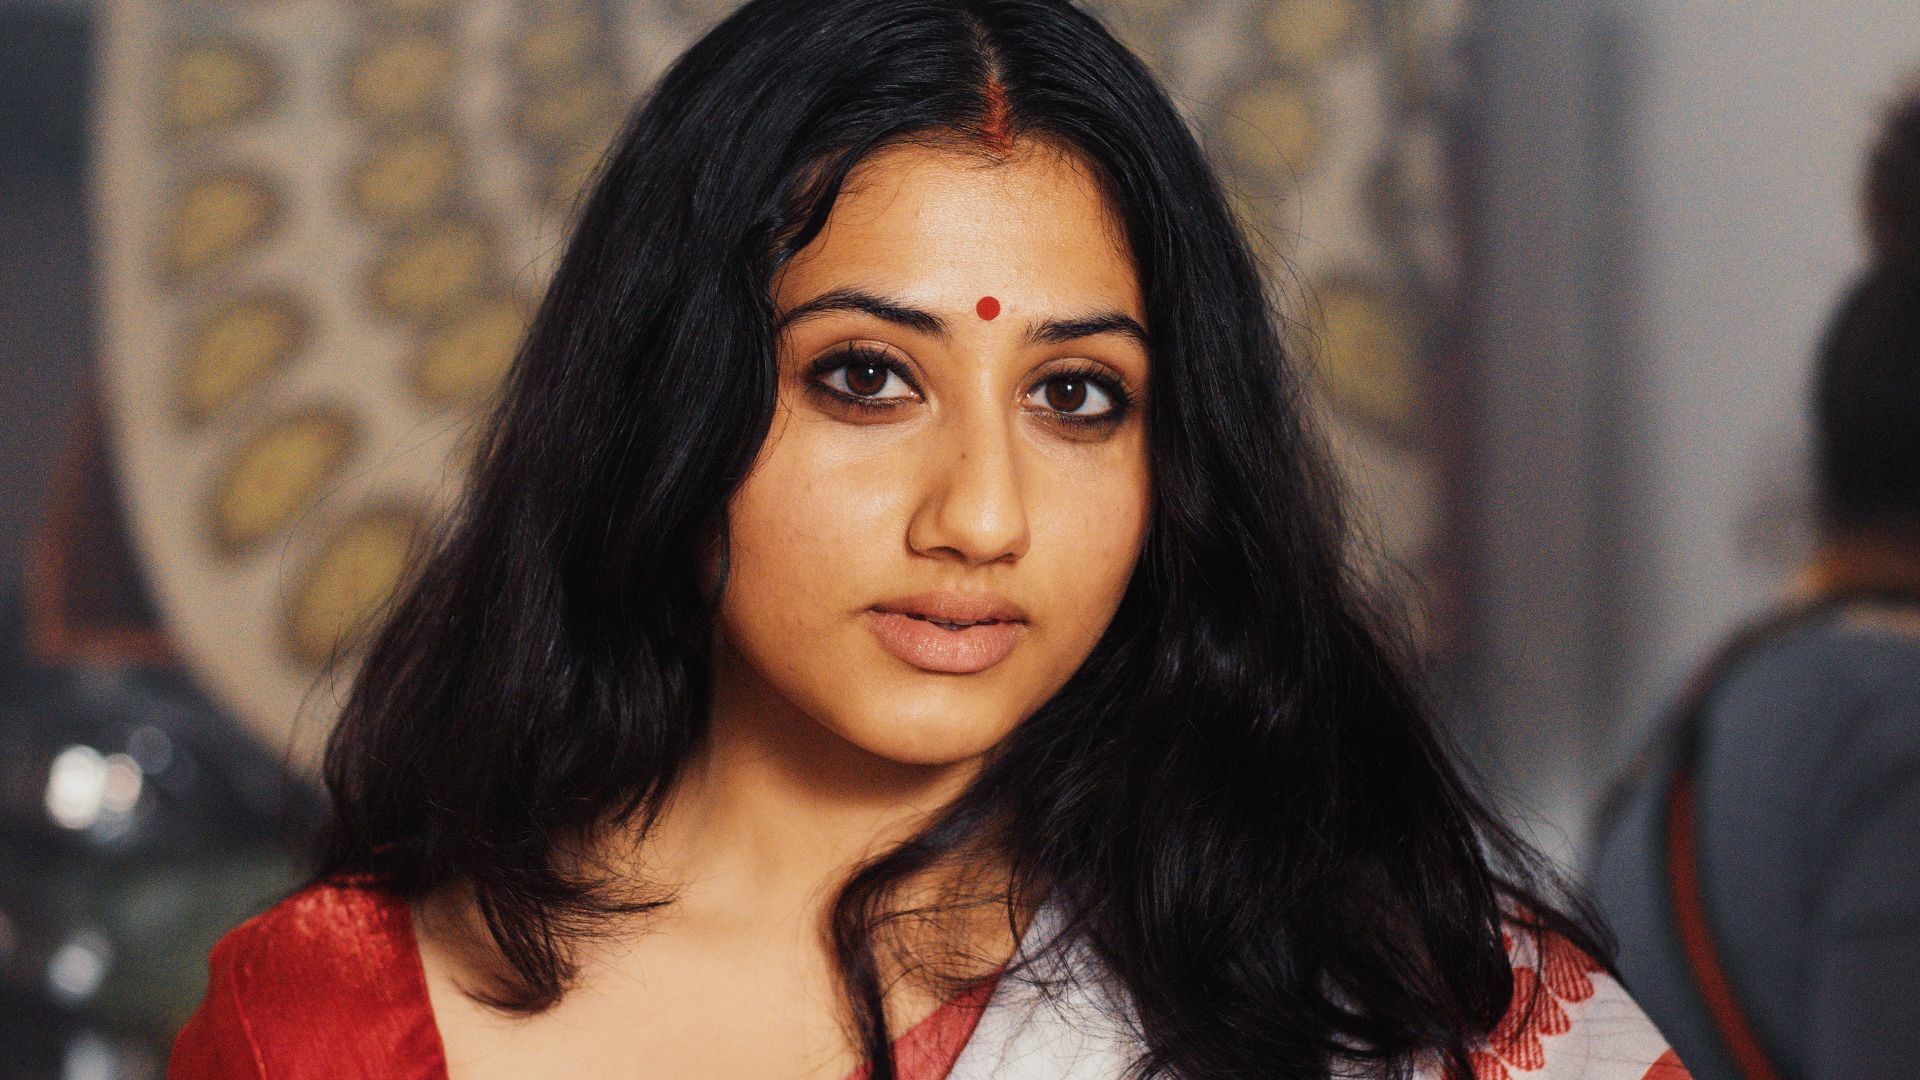 A woman wearing a sari and a red bindi looks into the camera.